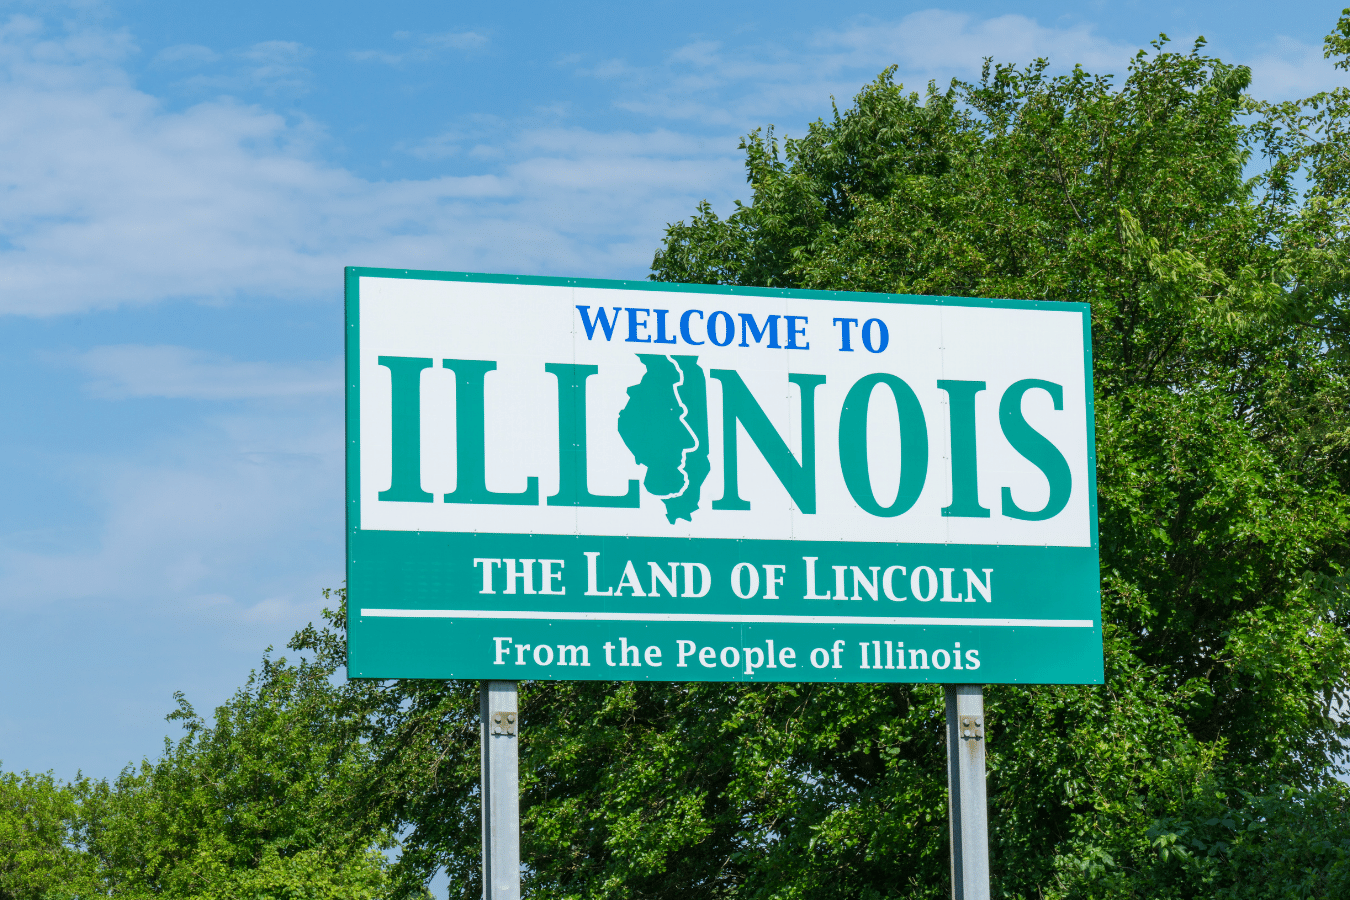 Welcome to the state of Illinois